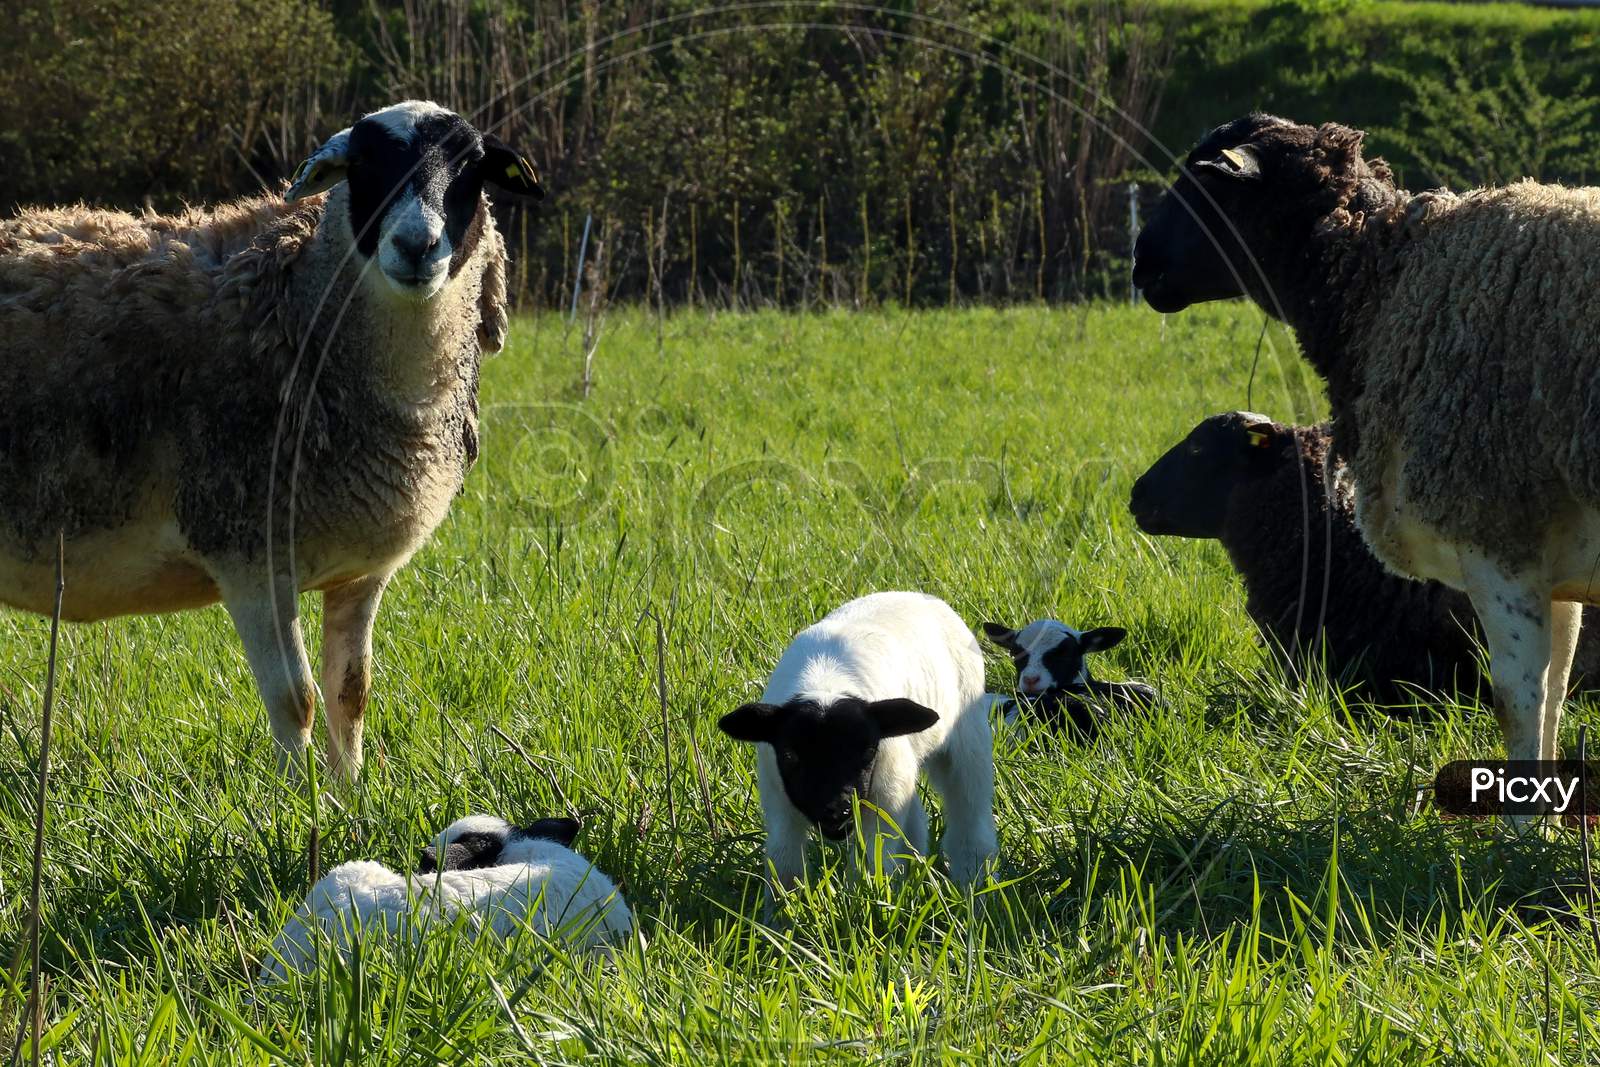 Lamb Surrounded By Sheep In The Grass On A Spring Day In Germany.